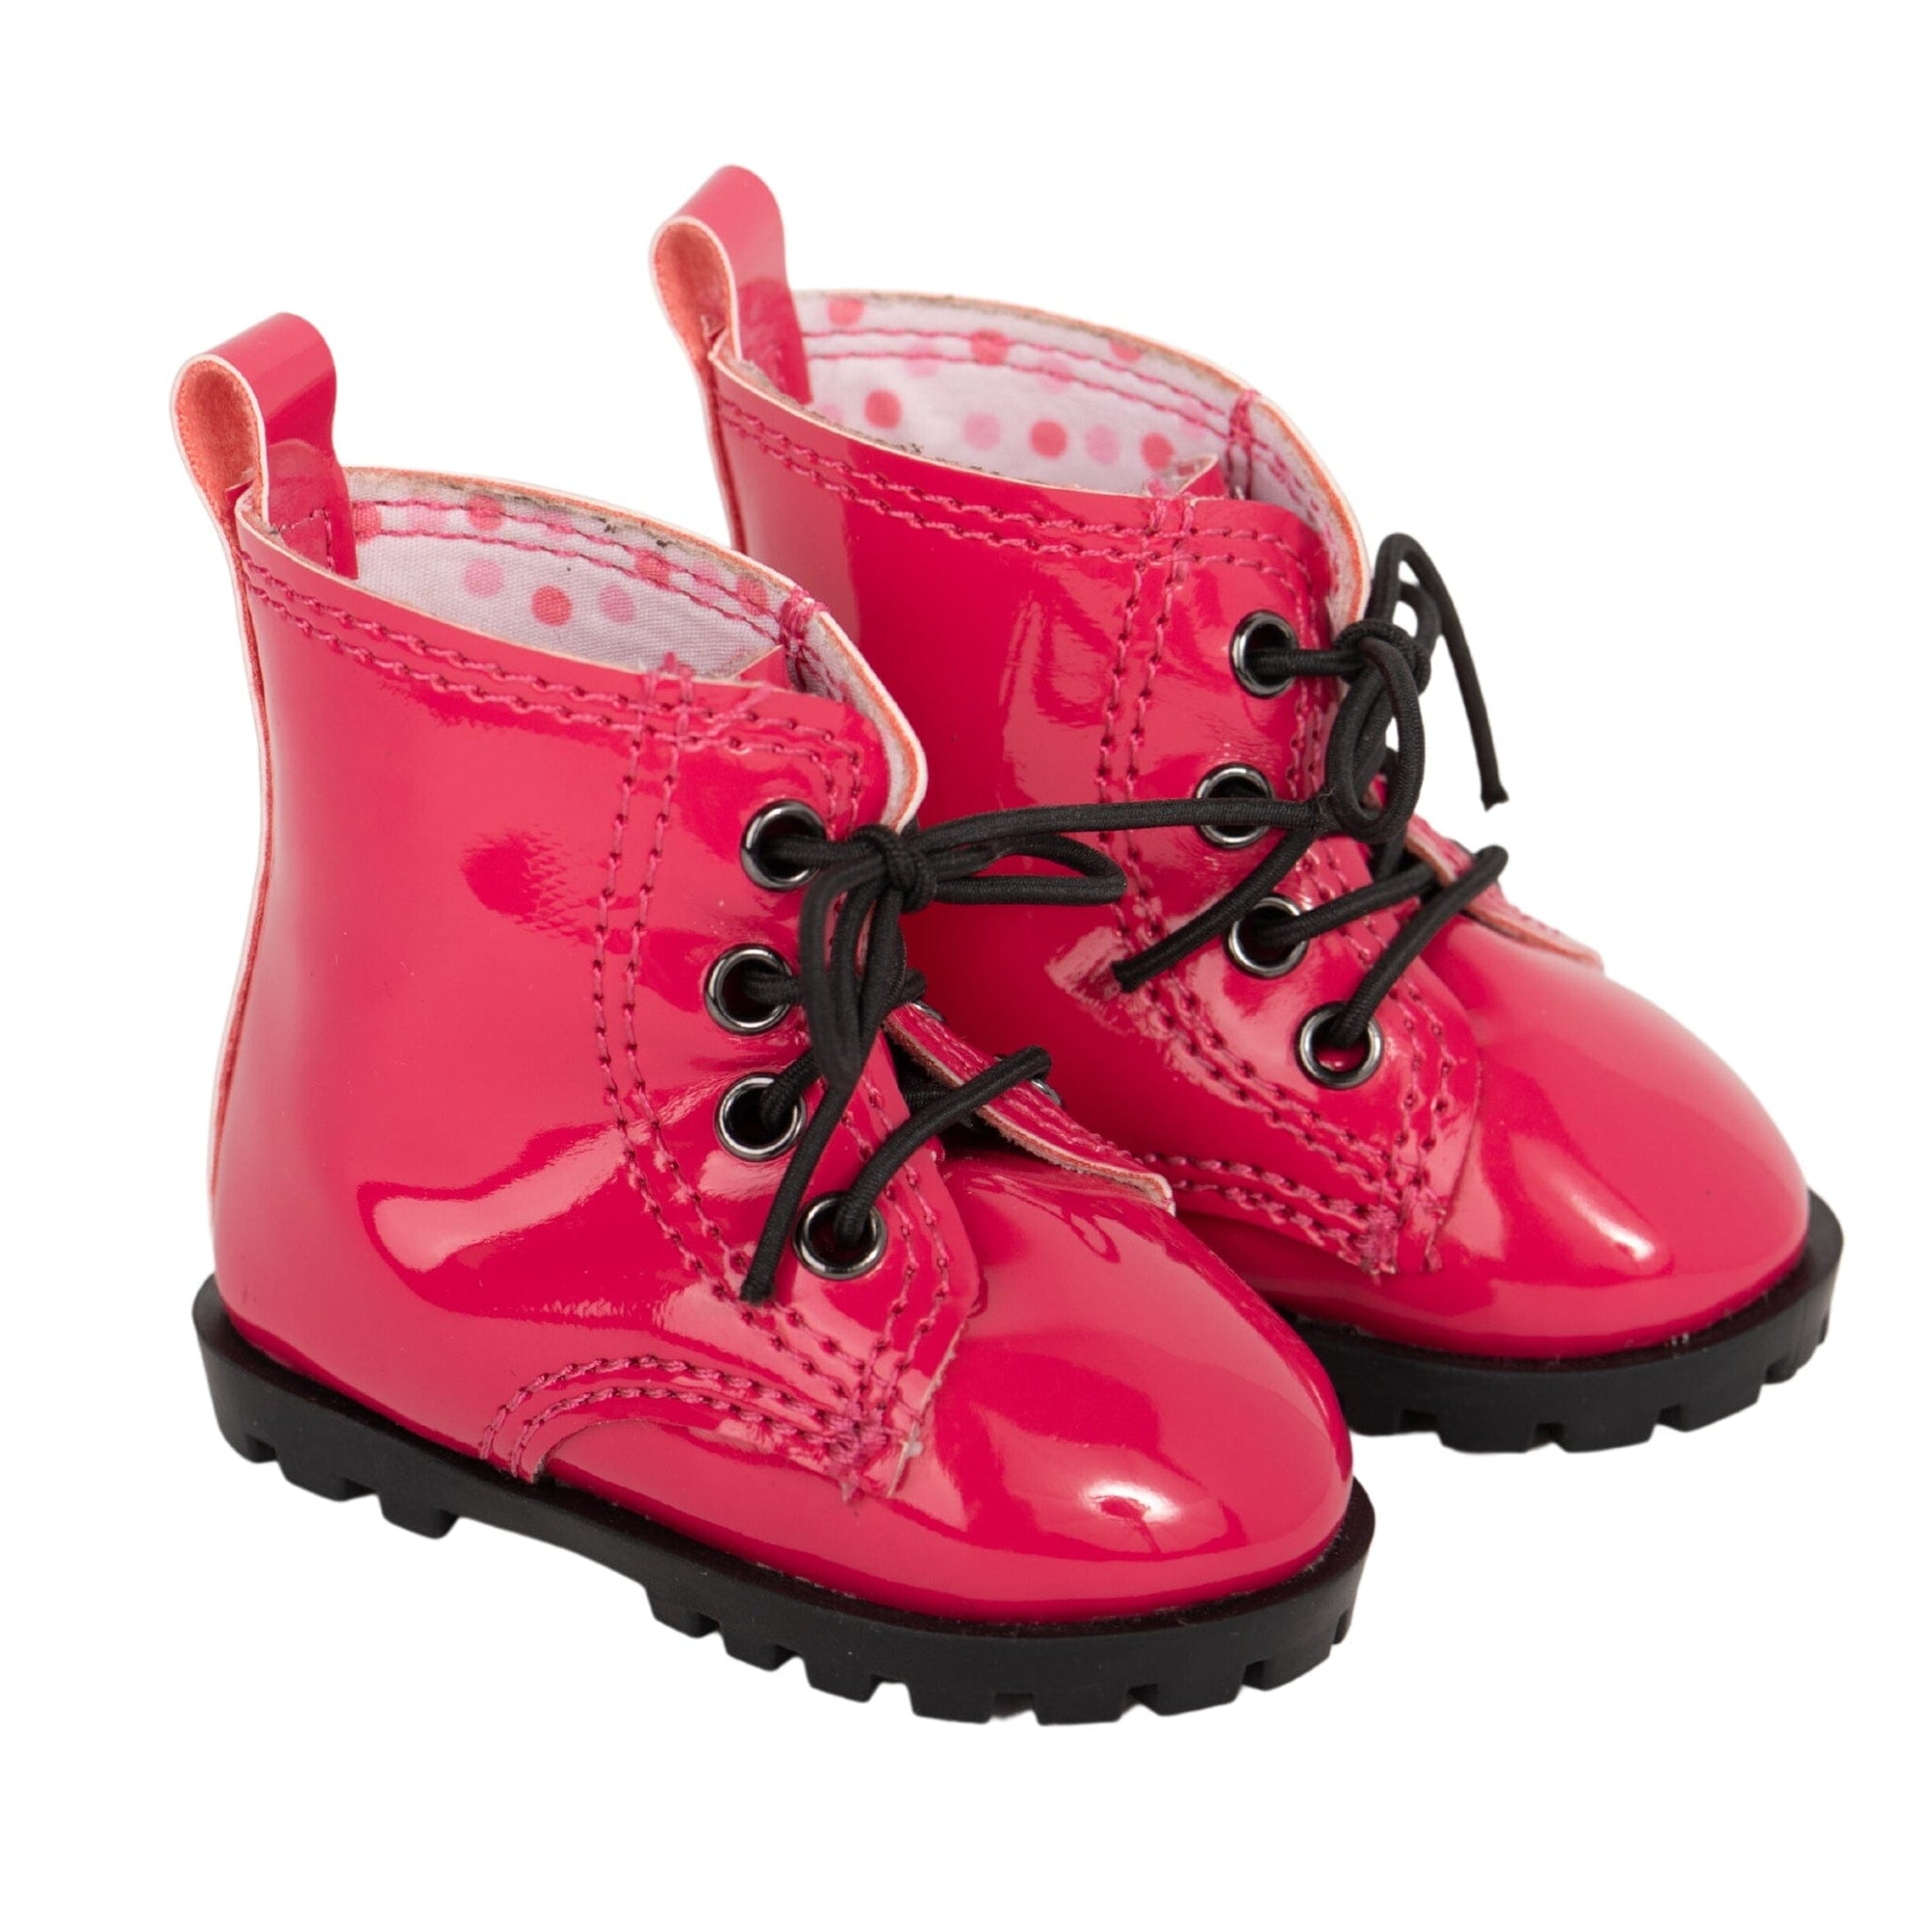 Stylish bright pink lace-up boots with polka dot lining for 18-inch dolls shows top Canadian quality